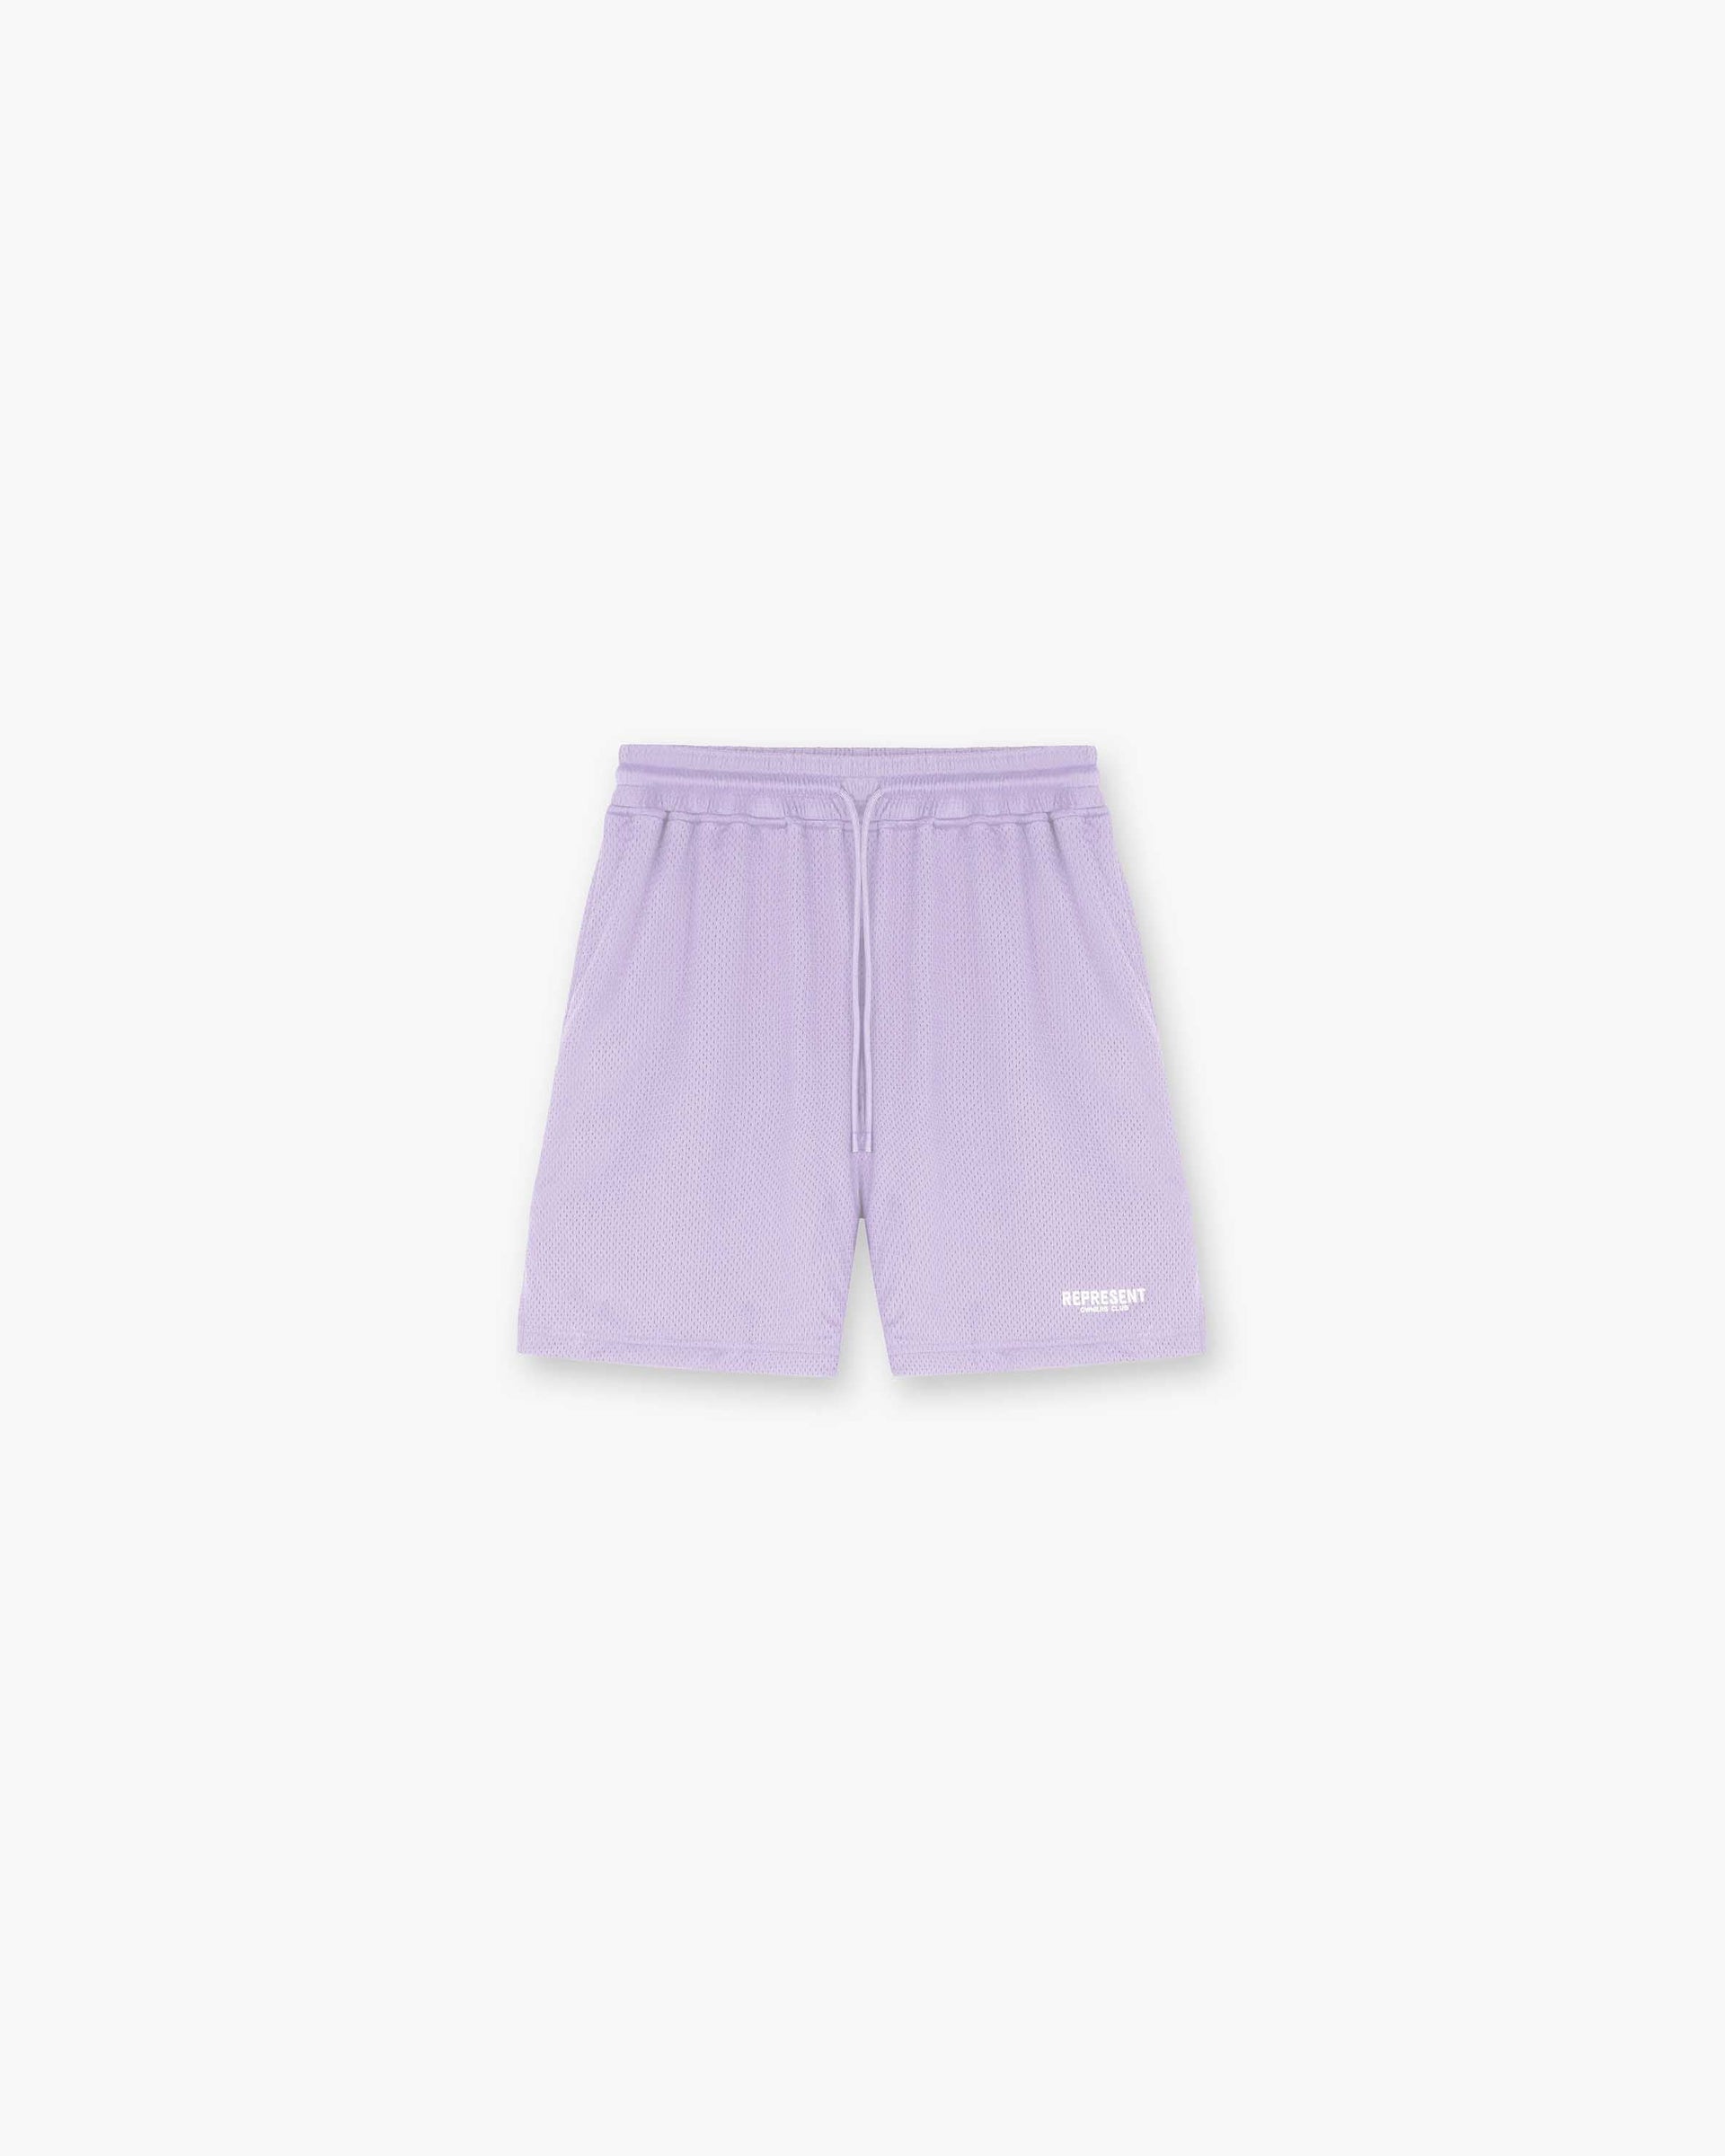 Represent Owners Club Mesh Shorts | Lilac Shorts Owners Club | Represent Clo